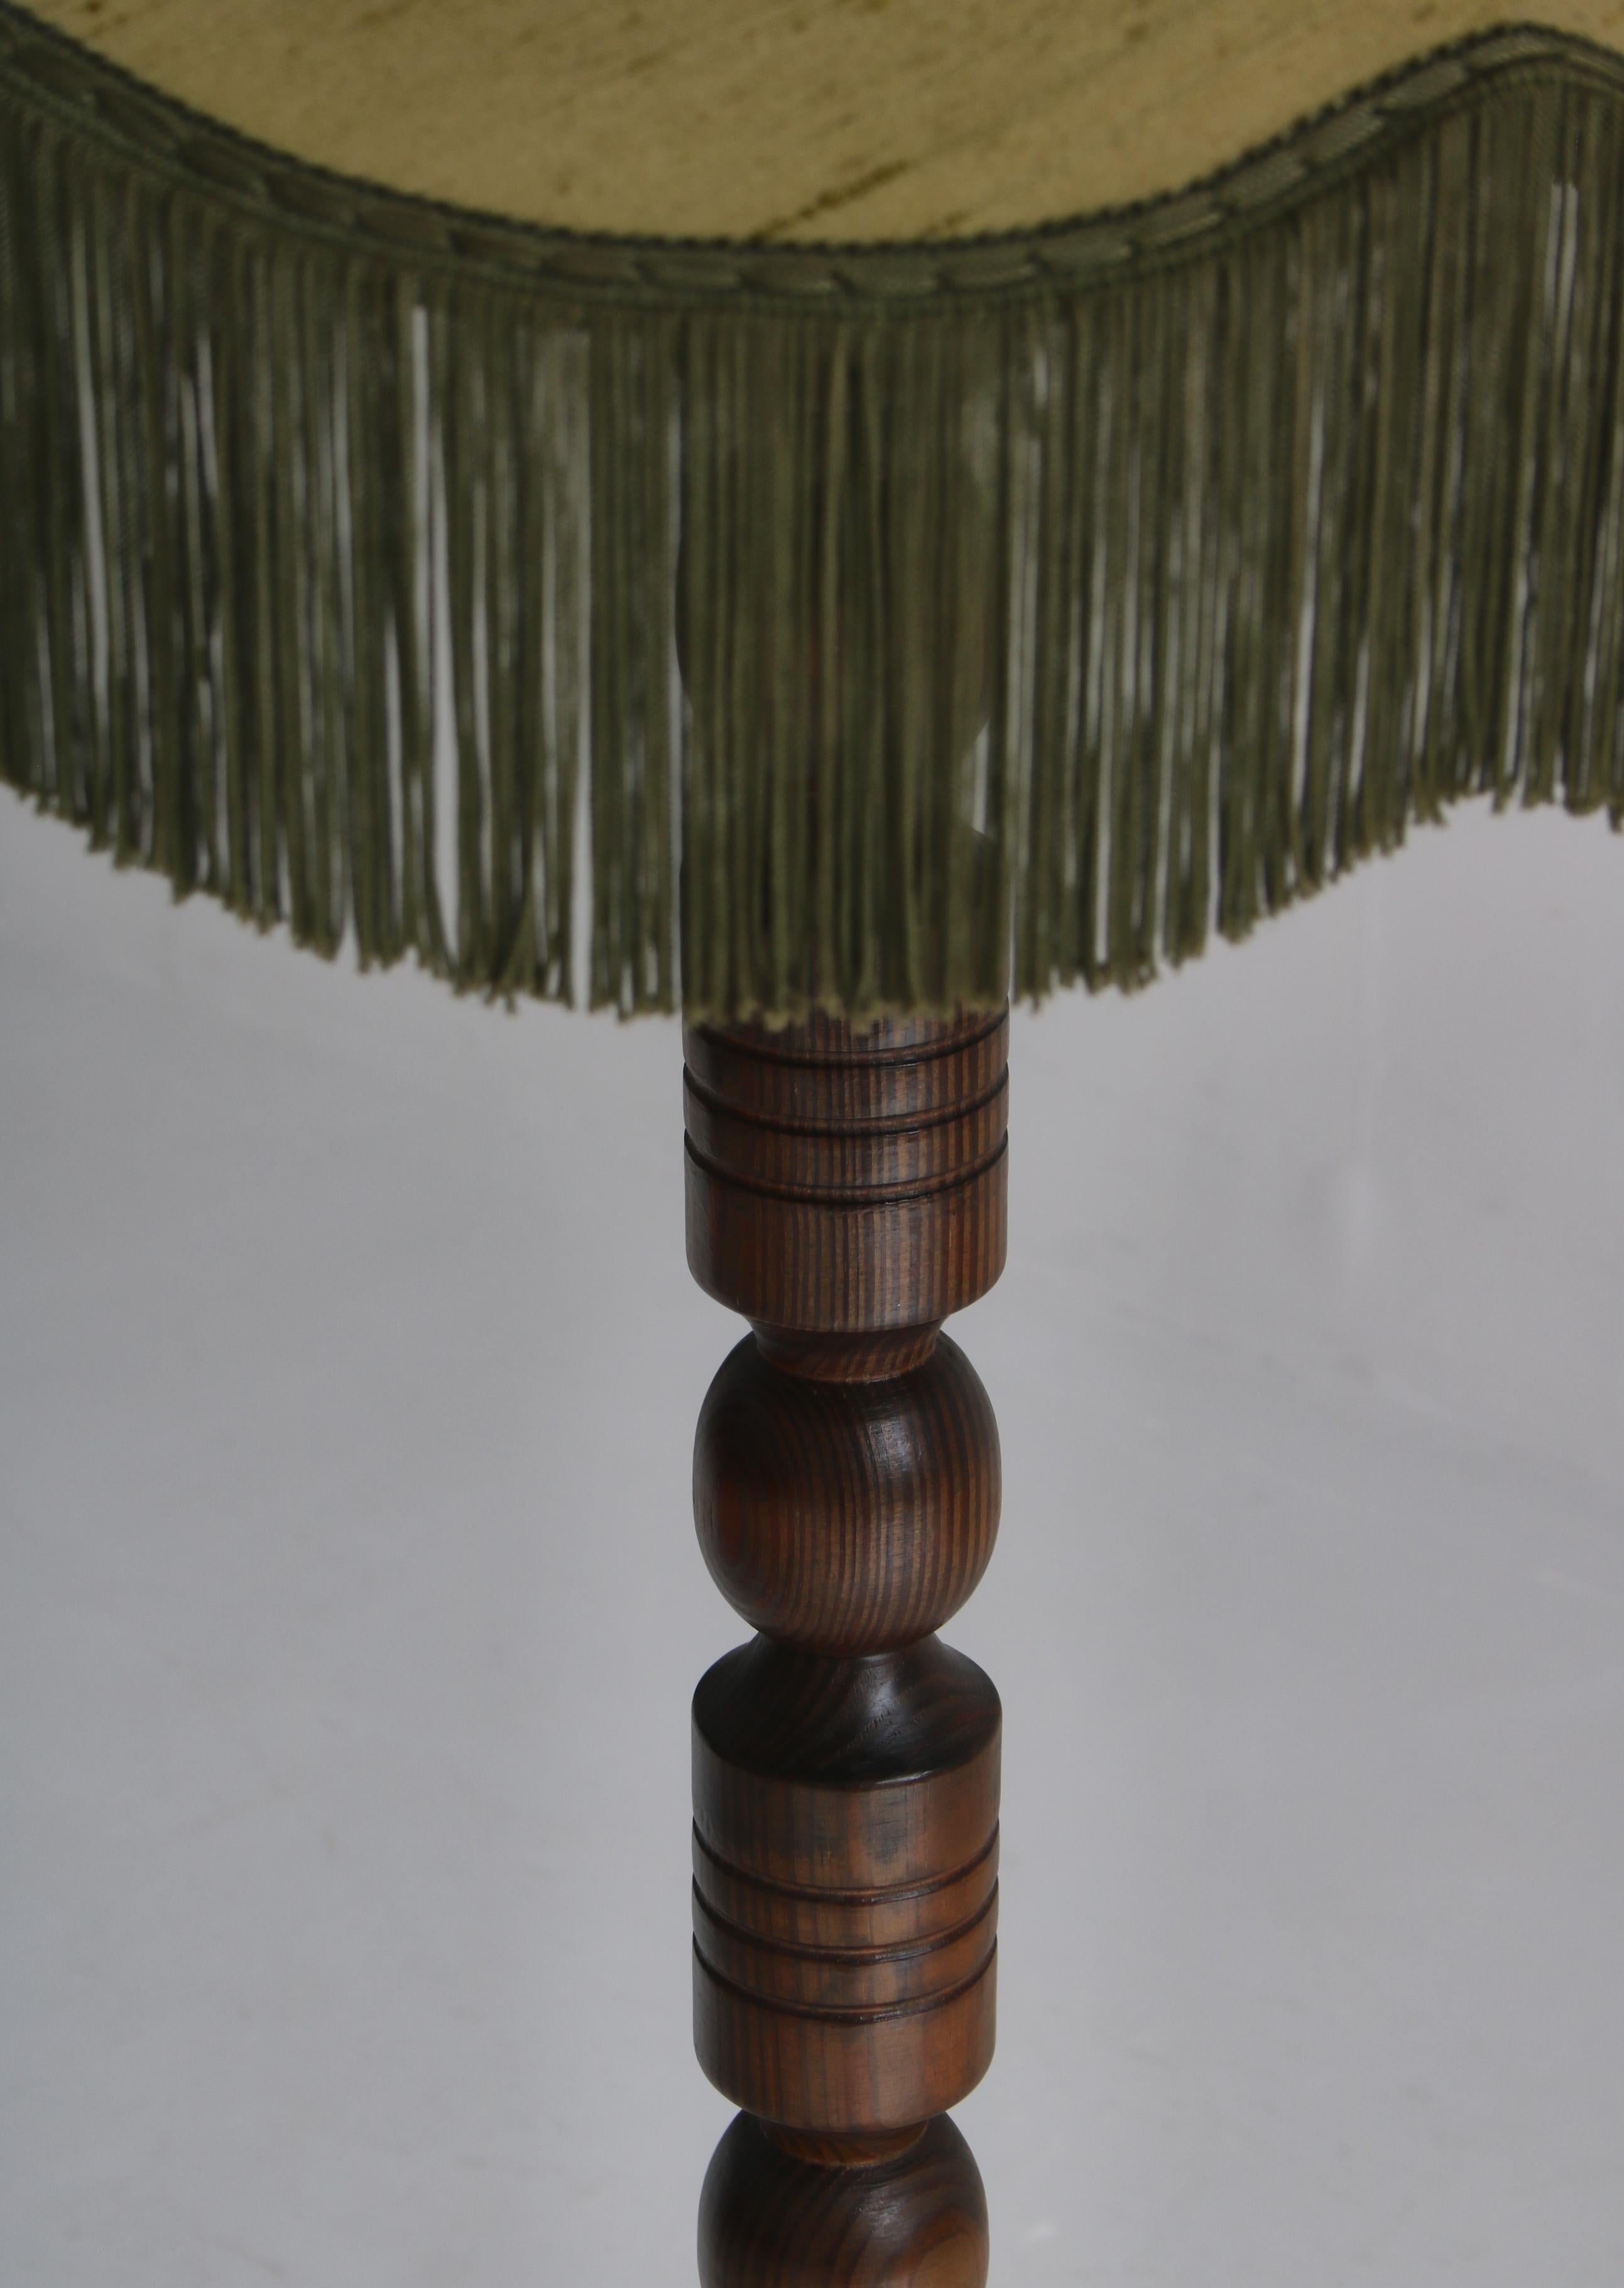 Mid-20th Century Floor Lamp in Dark Stained Pine w/ Green Silk Fringed Shade Denmark, 1930s For Sale